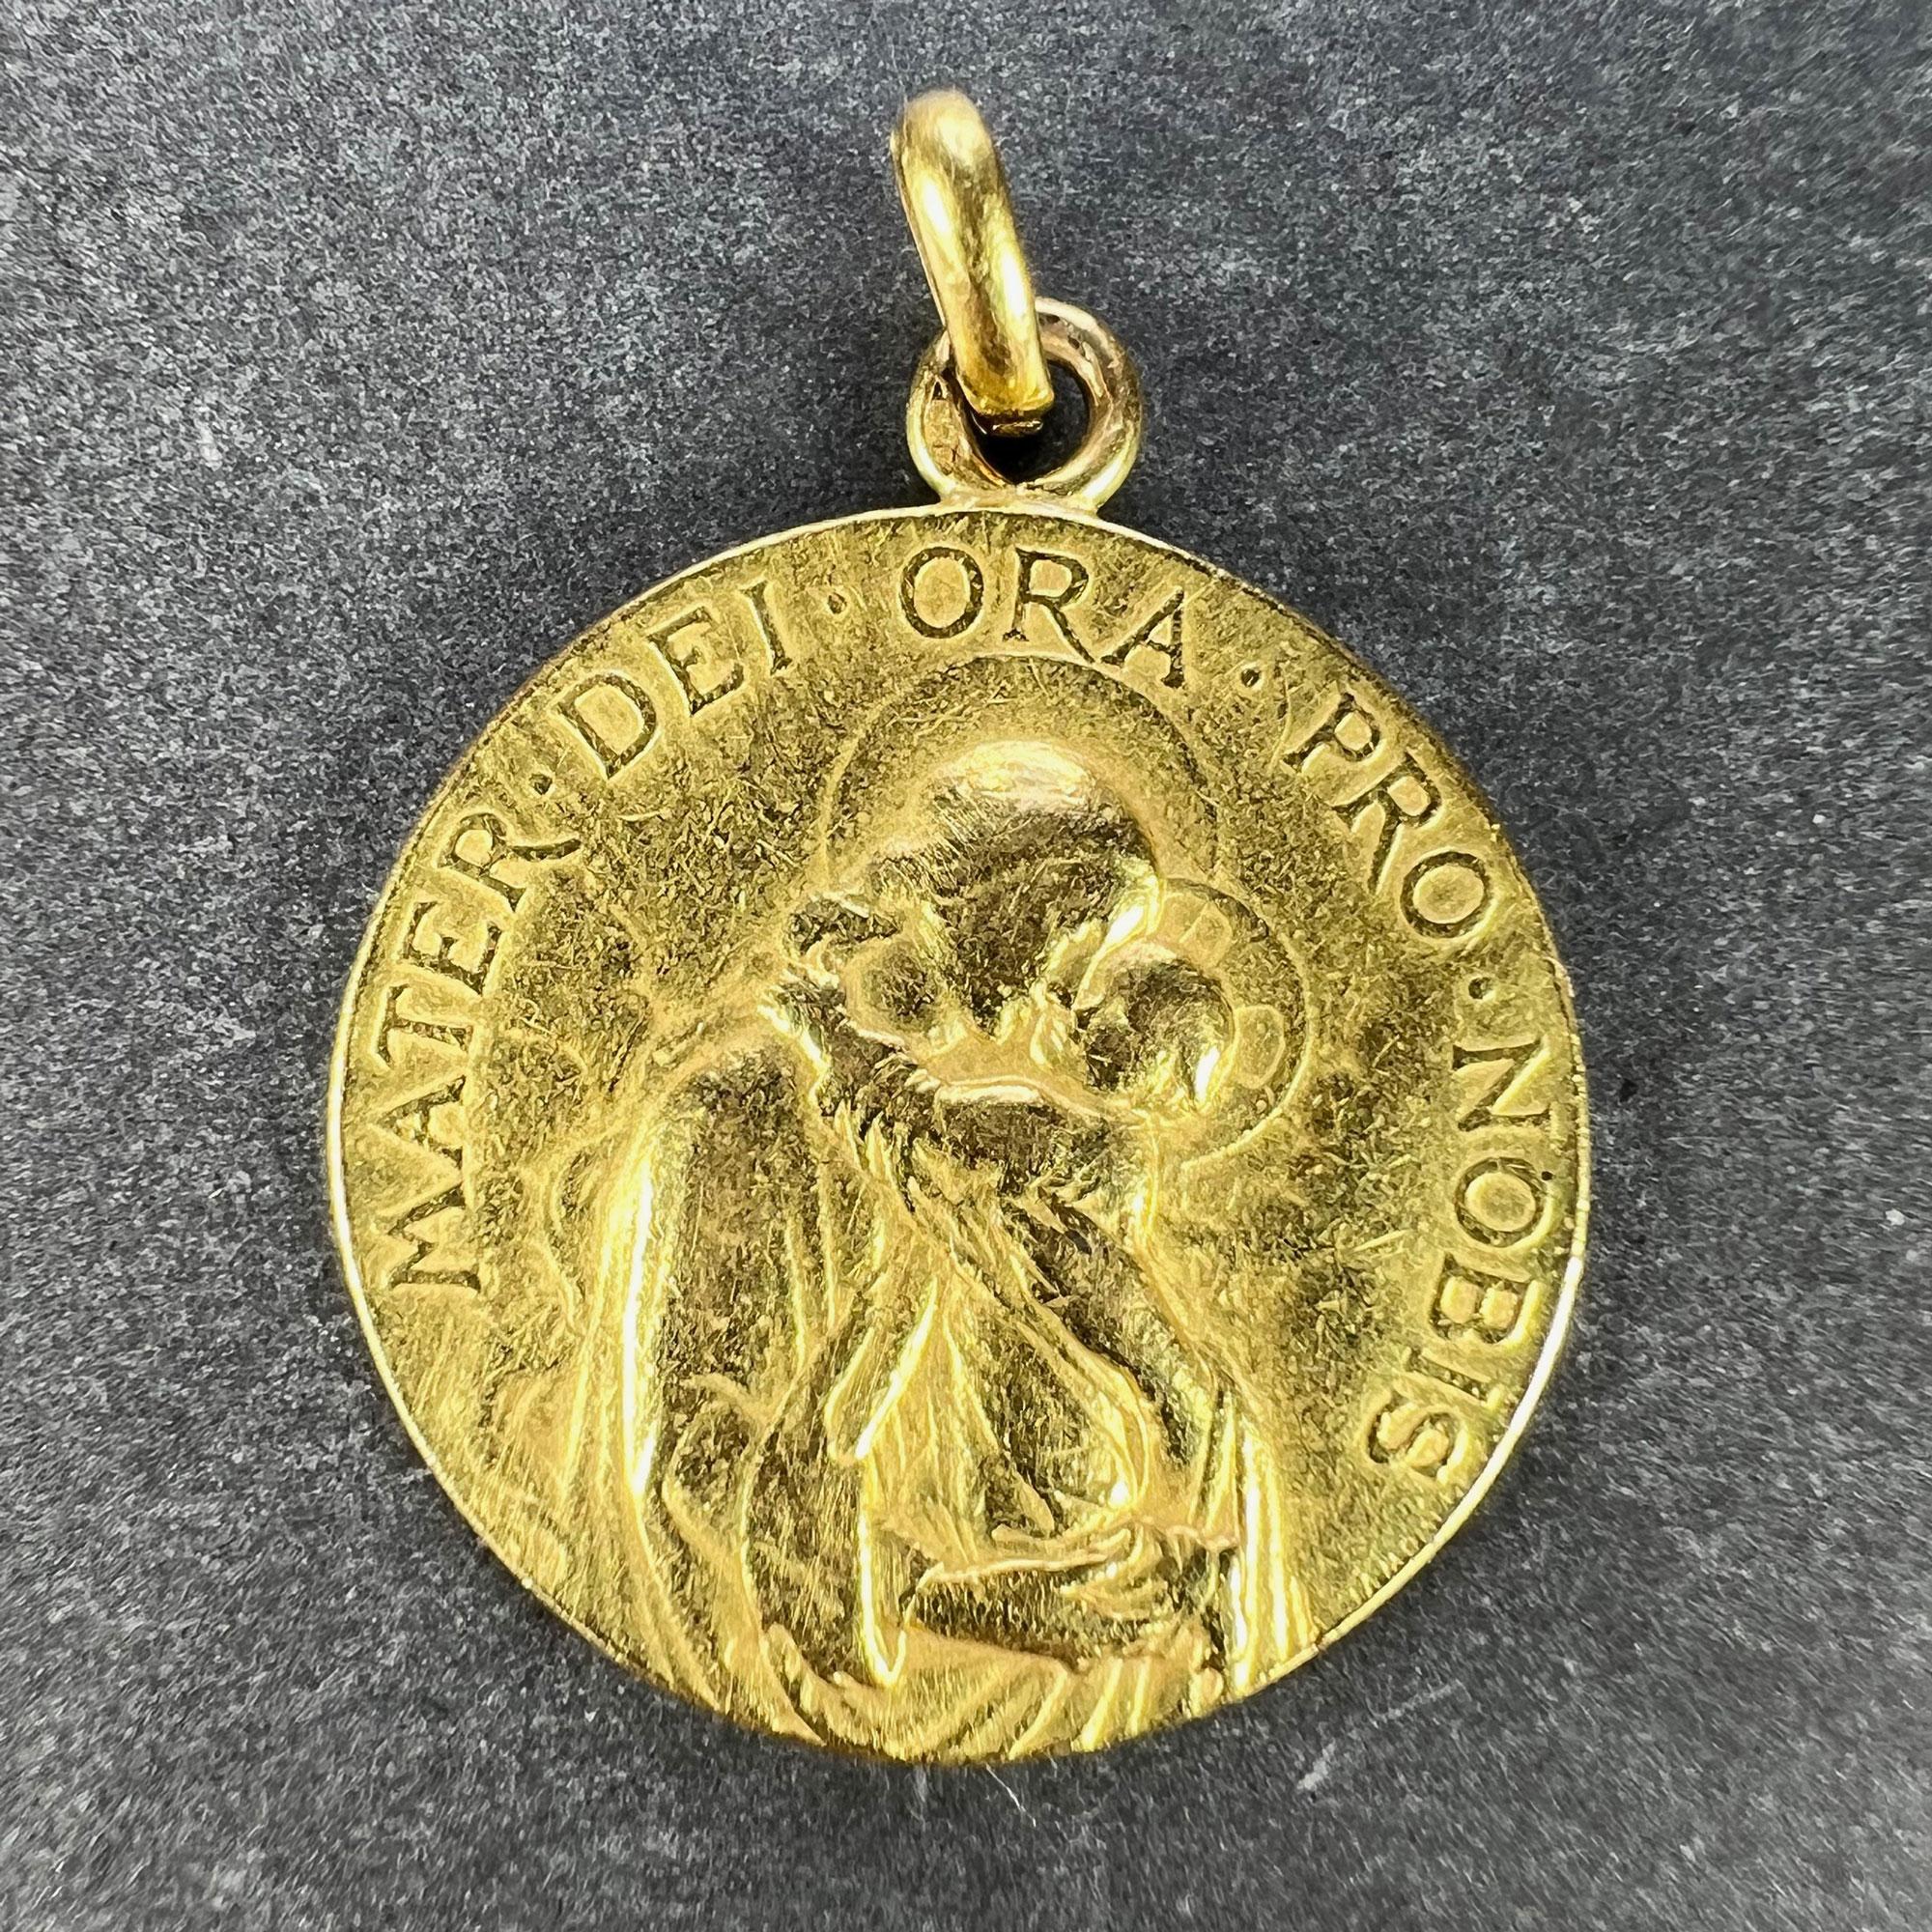 A French 18 karat (18K) yellow gold charm pendant designed as a round medal with a relief of the Madonna and Child surrounded by clouds, with the Latin motto 'MATER DEI ORA PRO NOBIS' (Mother of God pray for us) above. The reverse depicting a branch